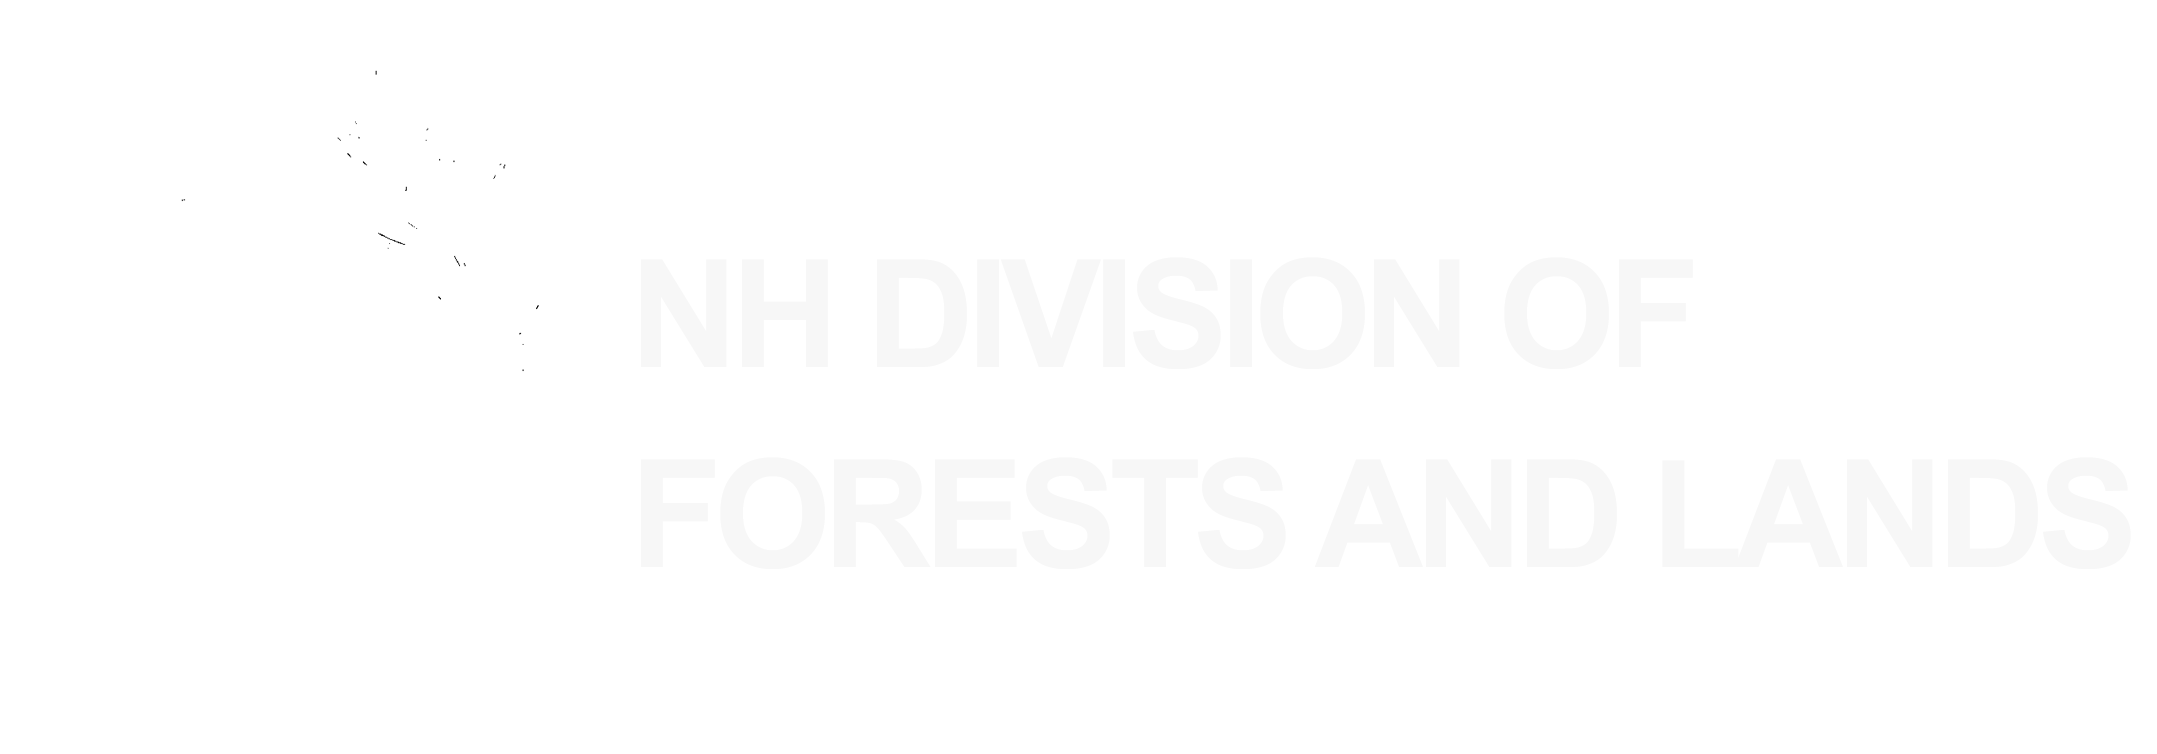 NH Division of Forests and Lands